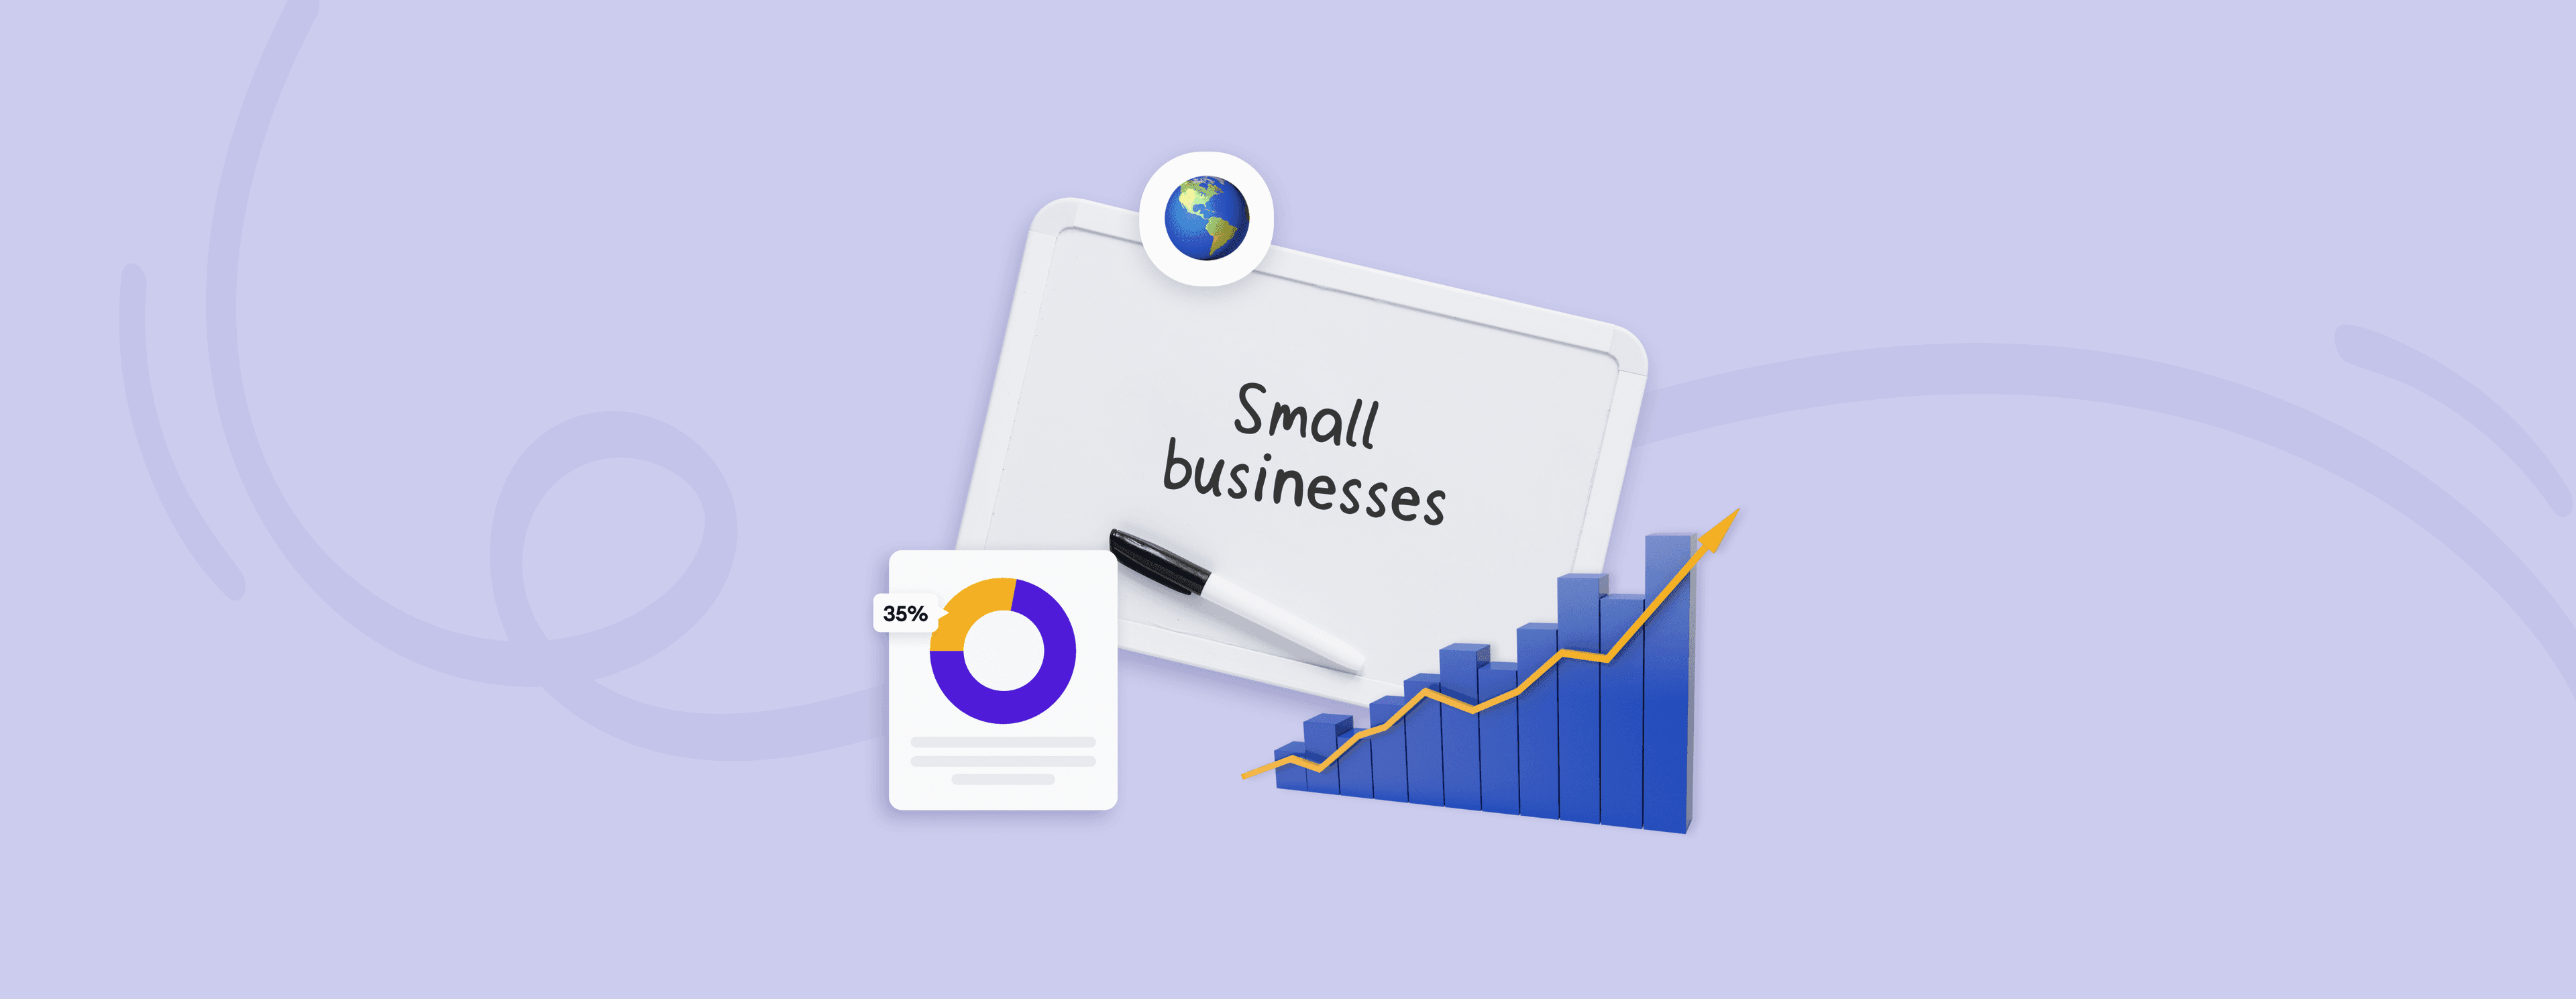 small business statistic cover image